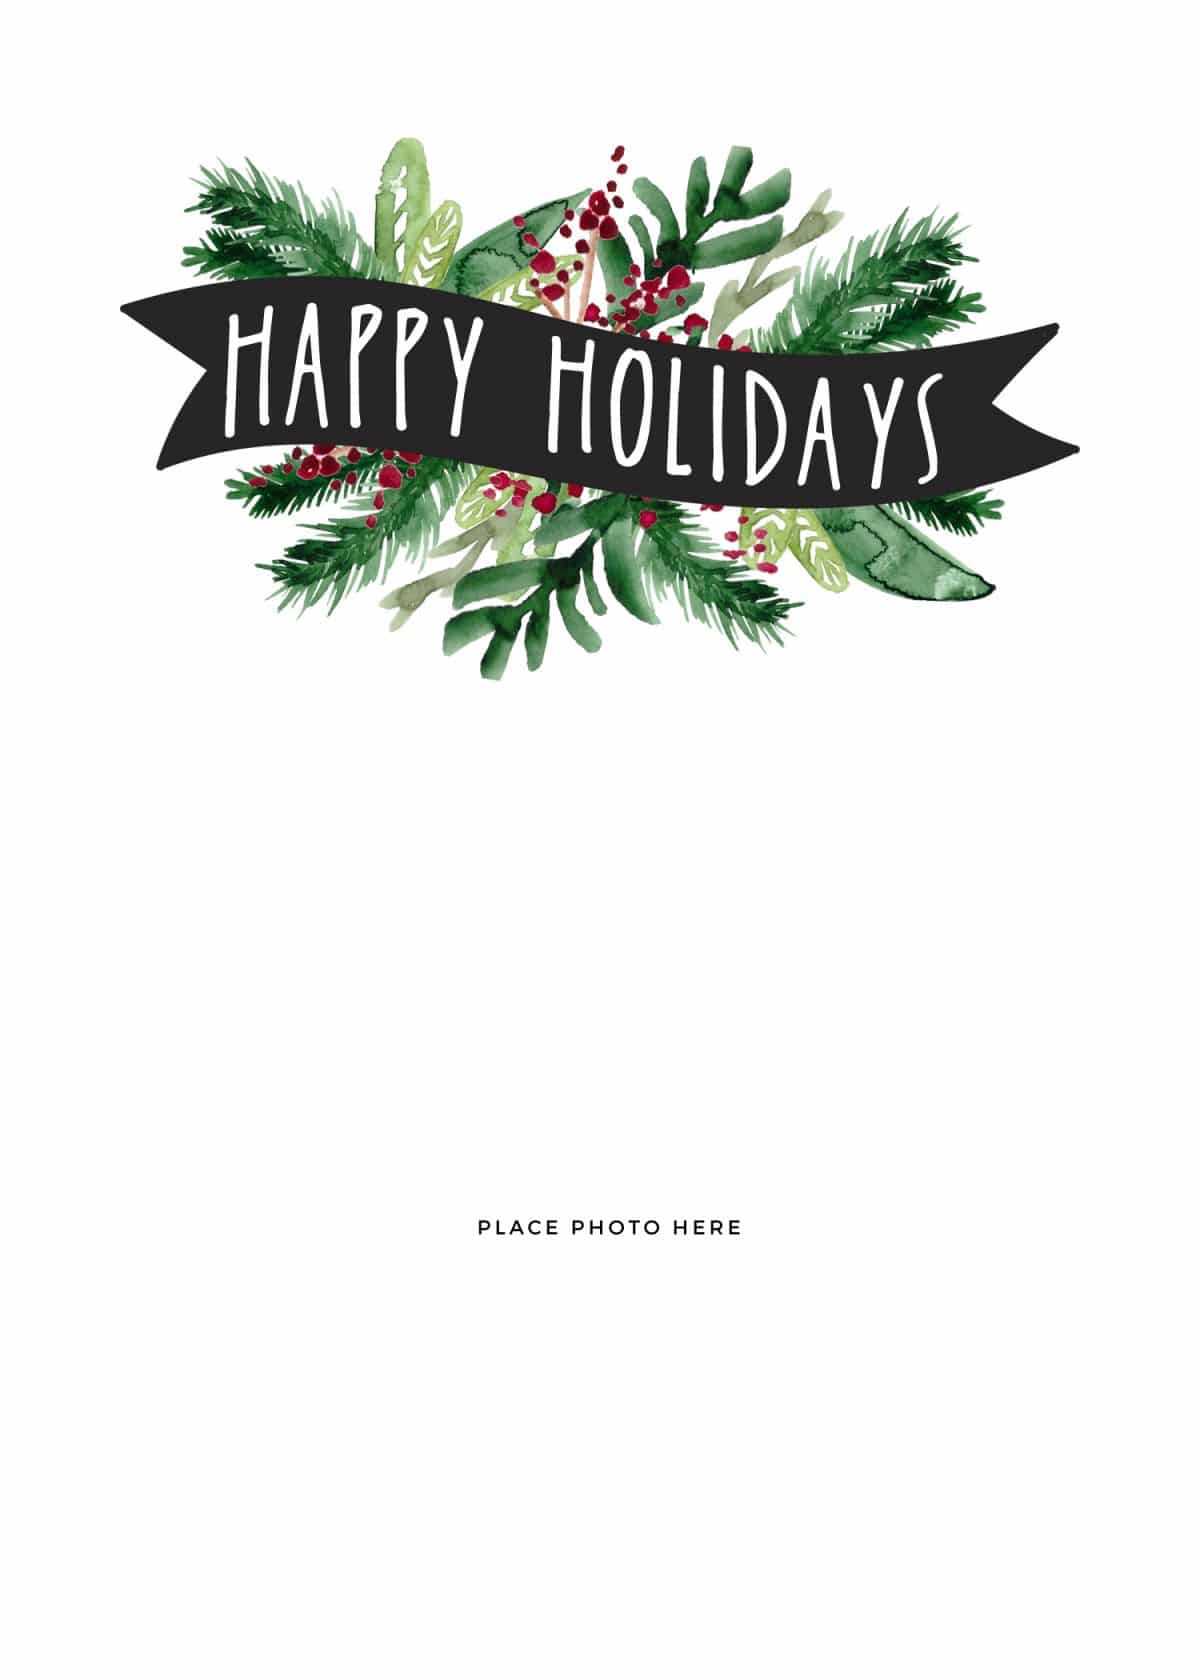 Make Your Own Photo Christmas Cards (For Free!) – Somewhat With Regard To Christmas Photo Cards Templates Free Downloads